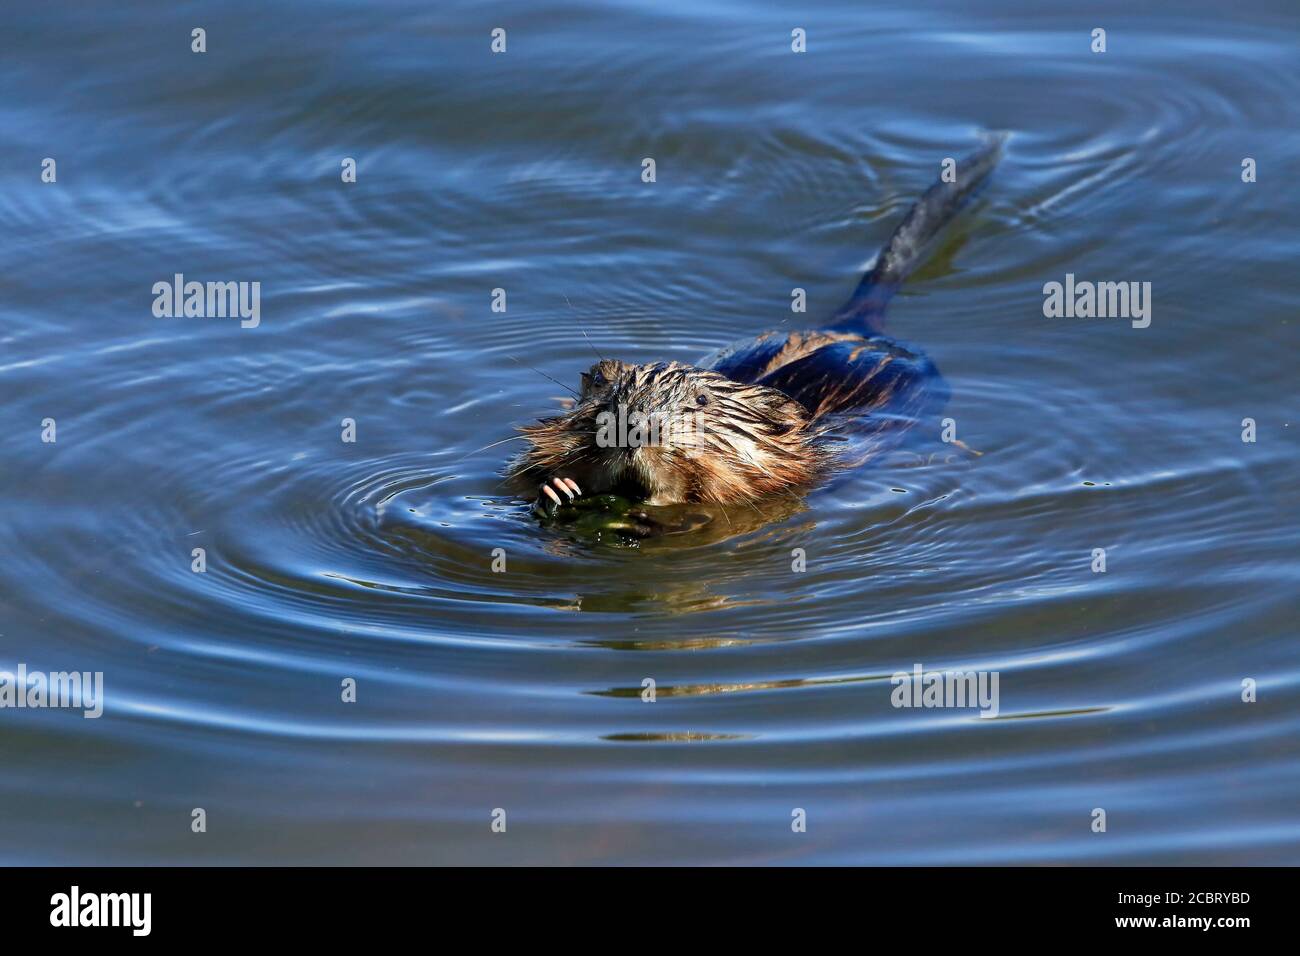 A muskrat in a pond eating a plant Stock Photo